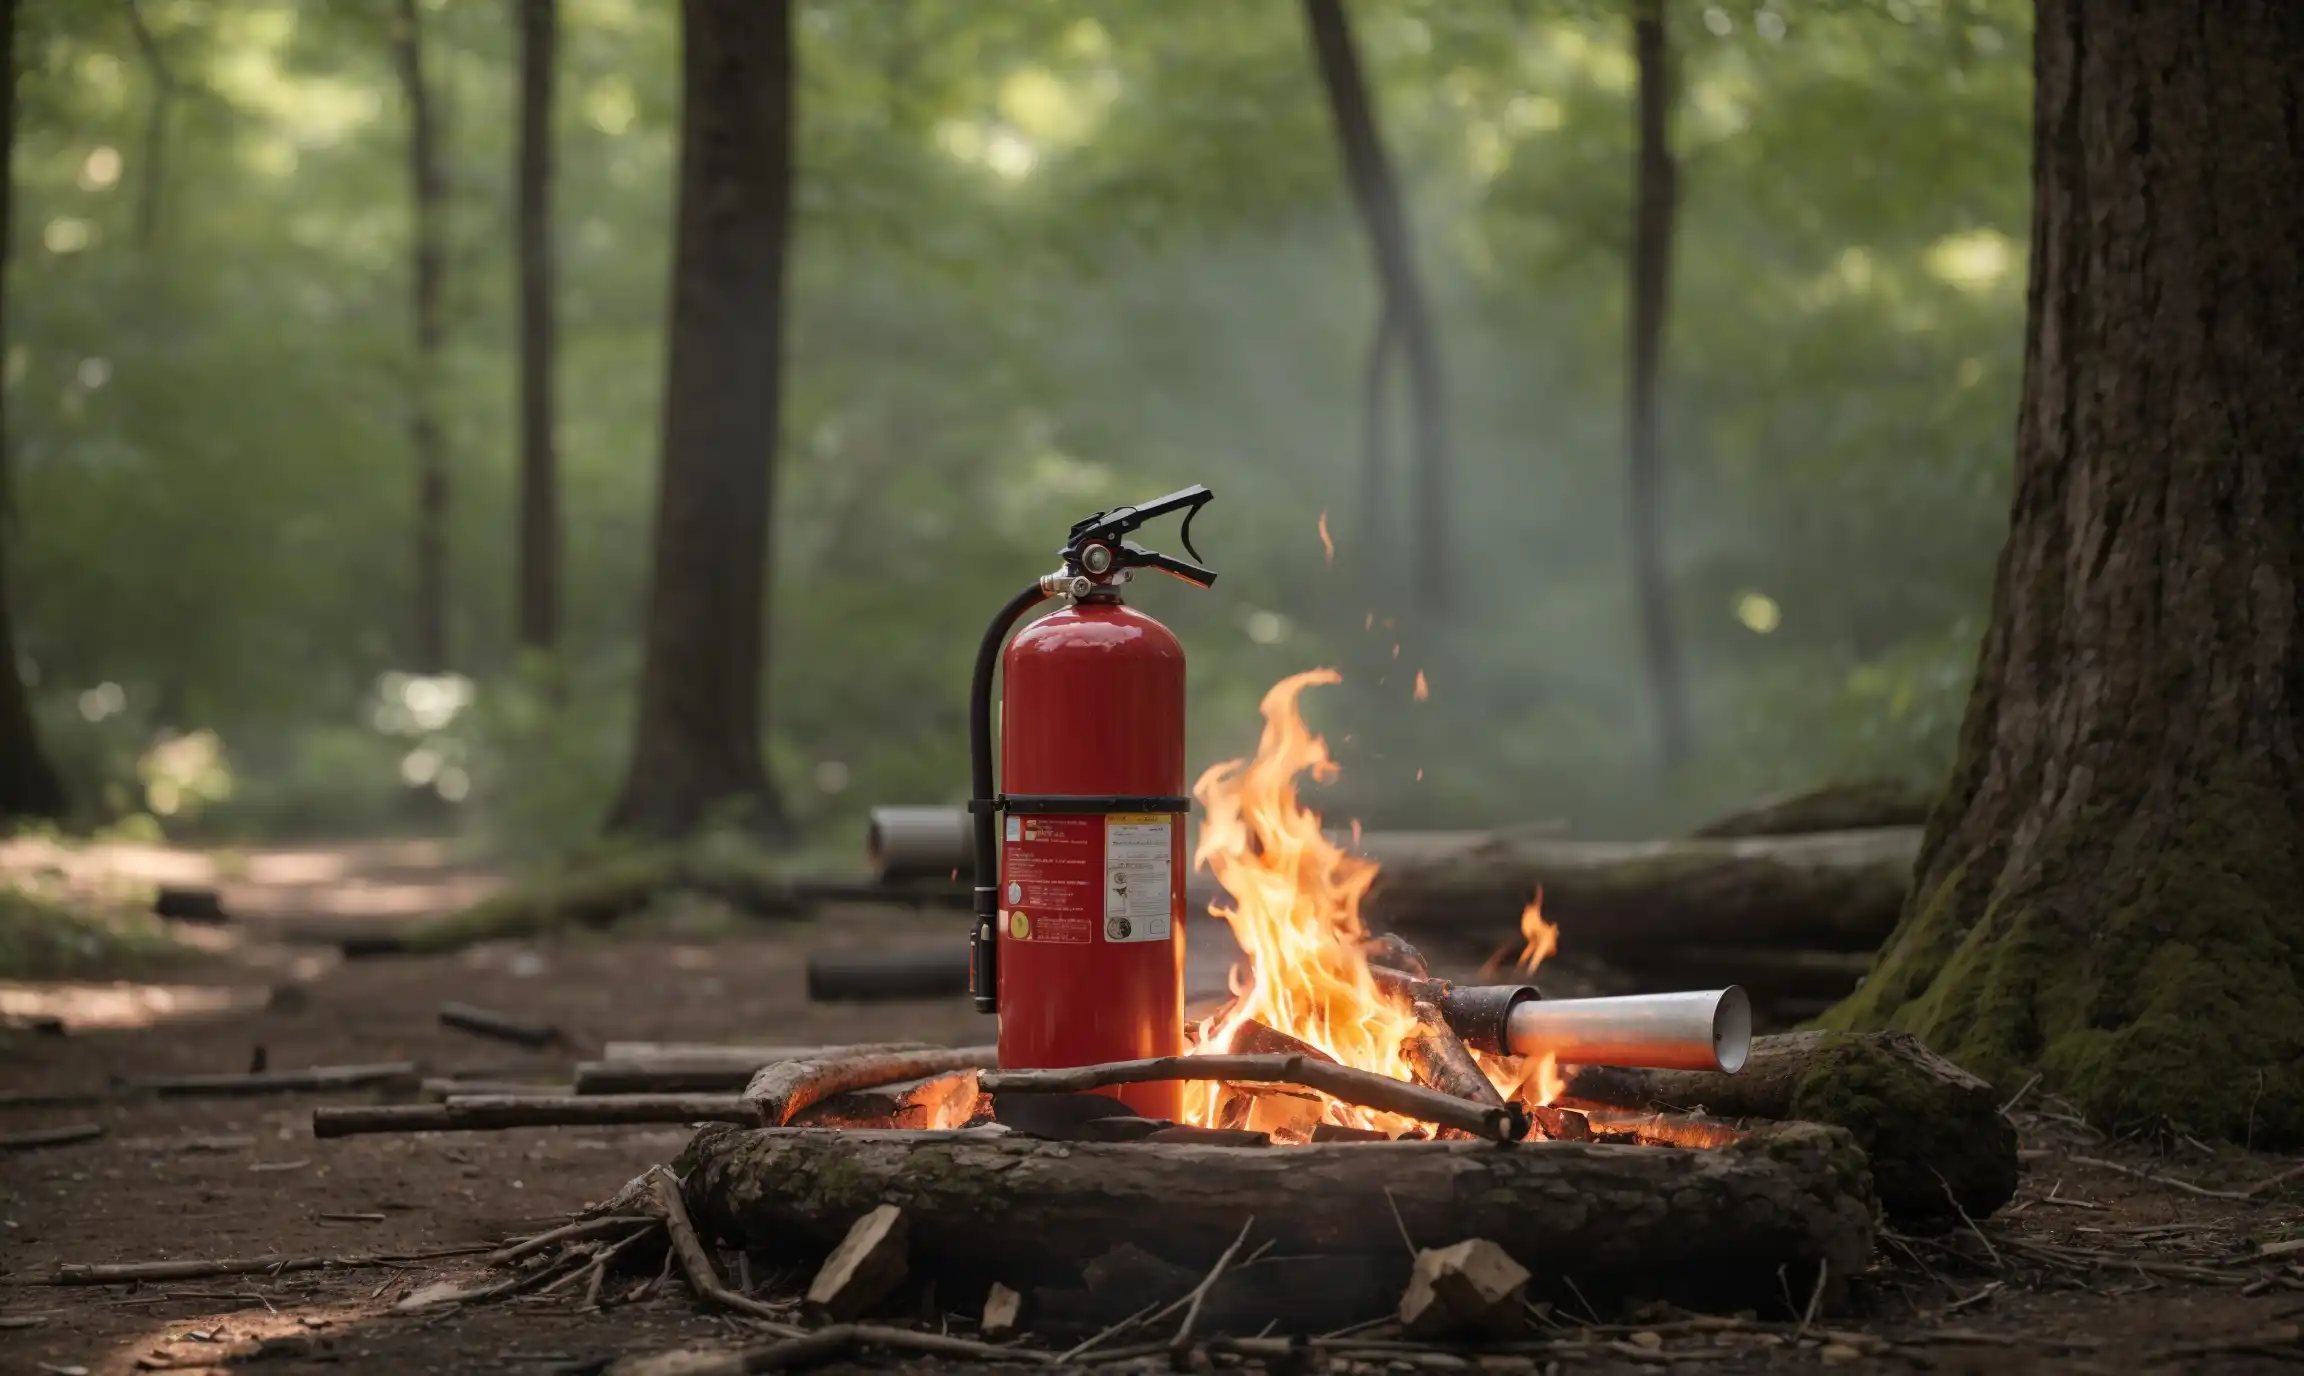 Fire Extinguisher on a Campfire